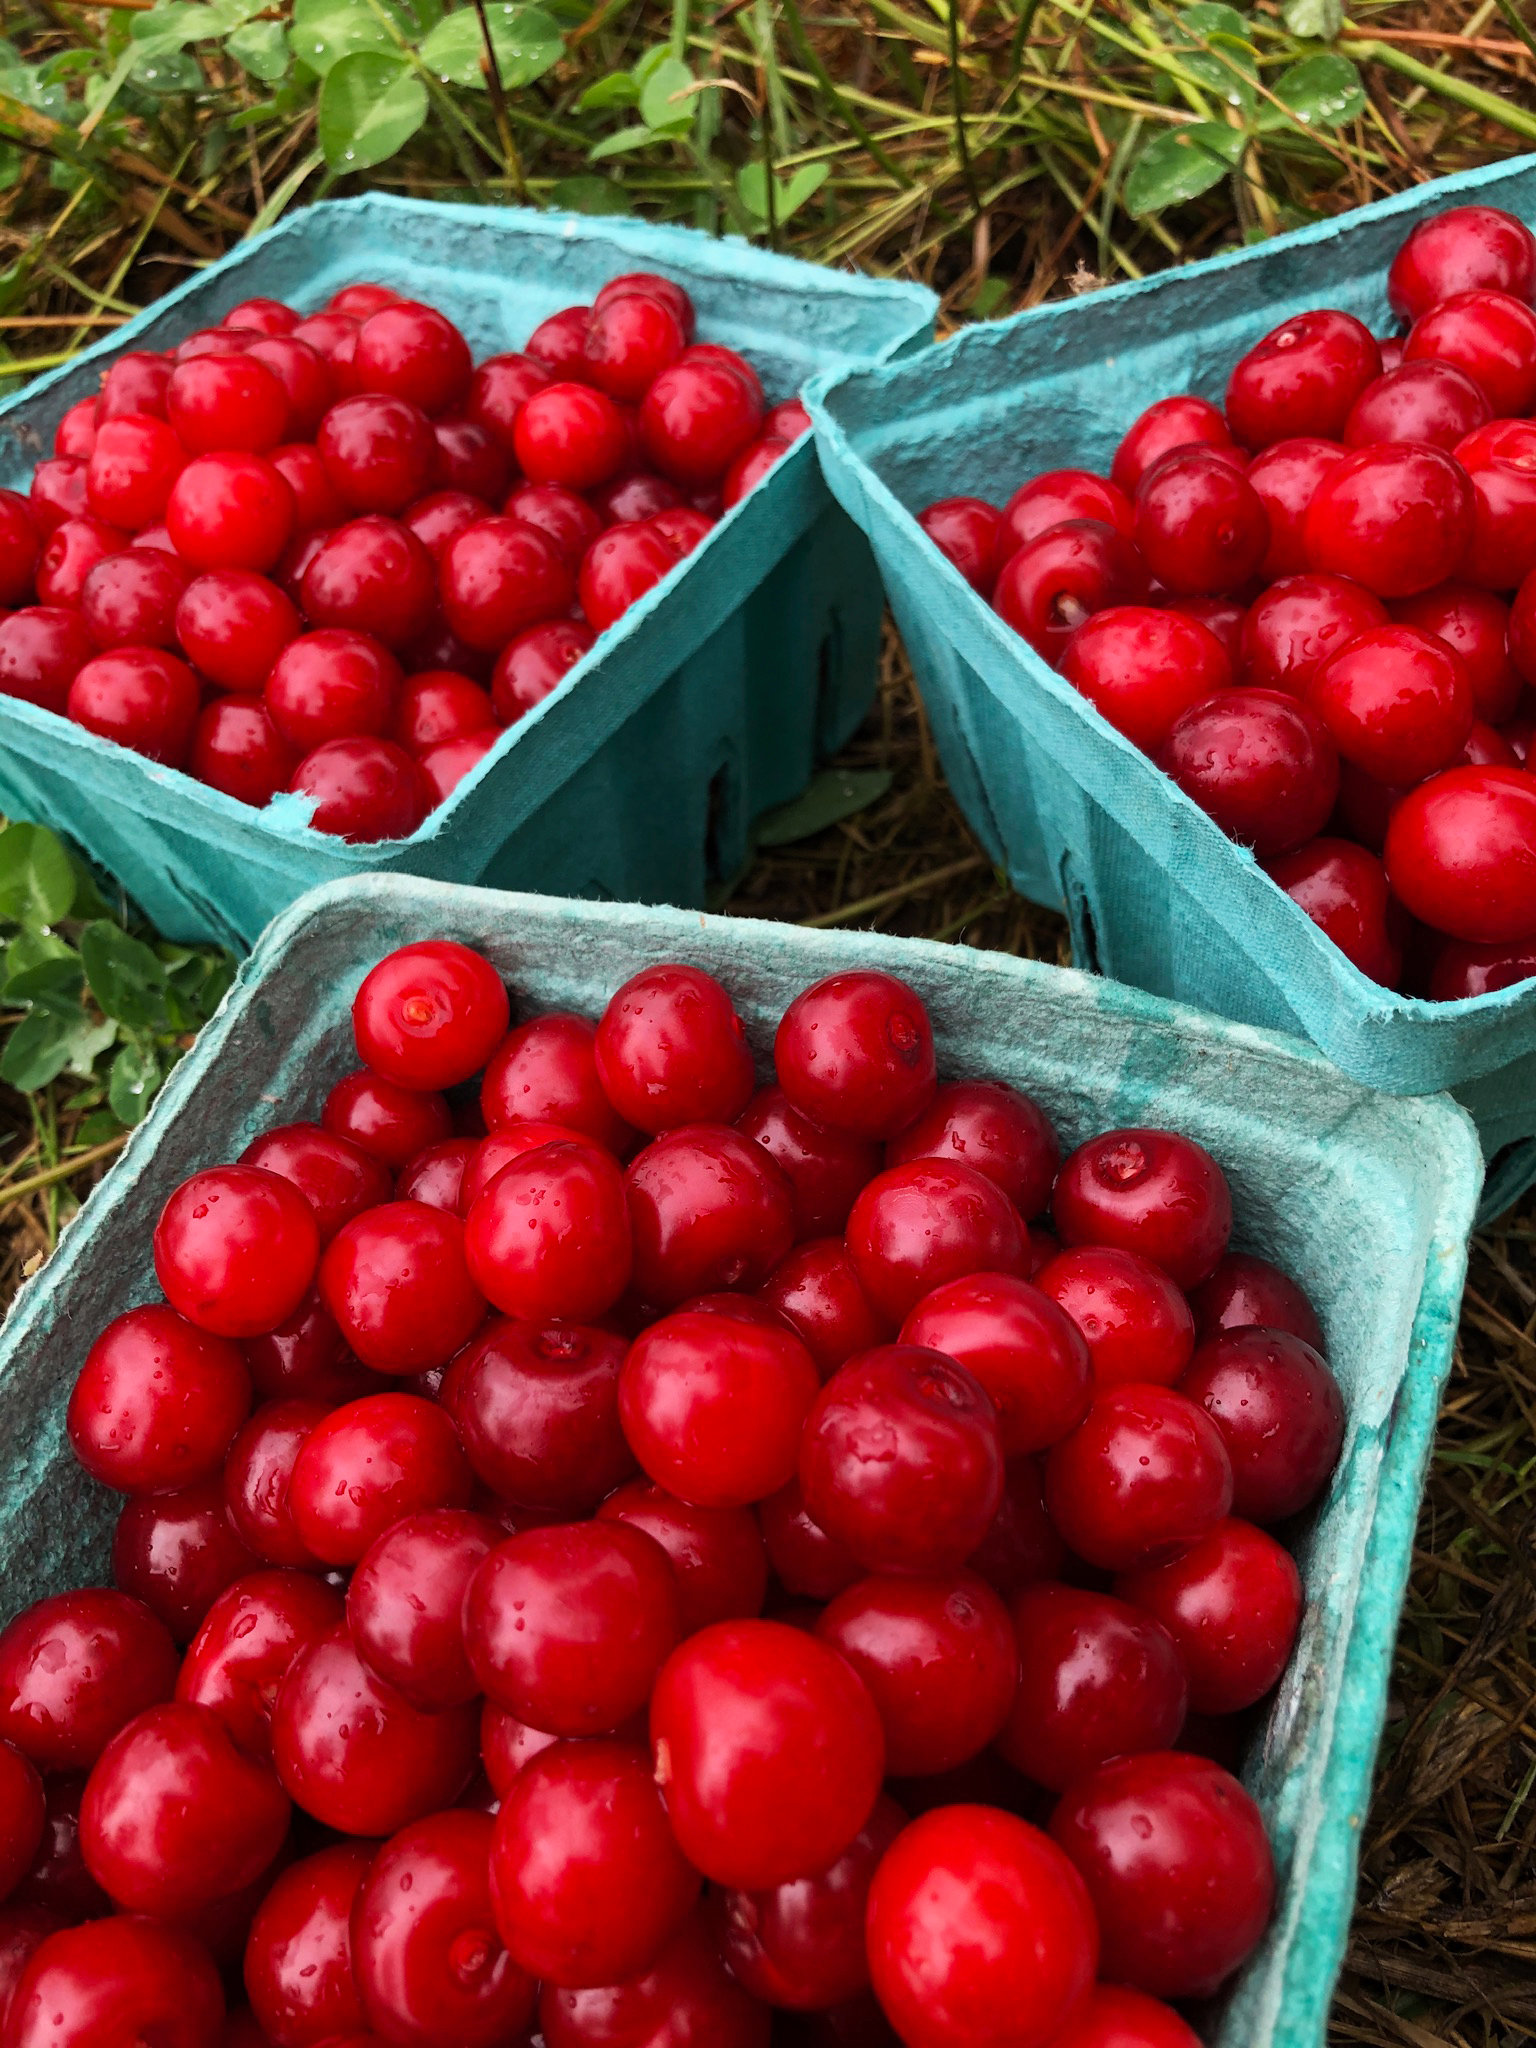 A Look At Online Cherries